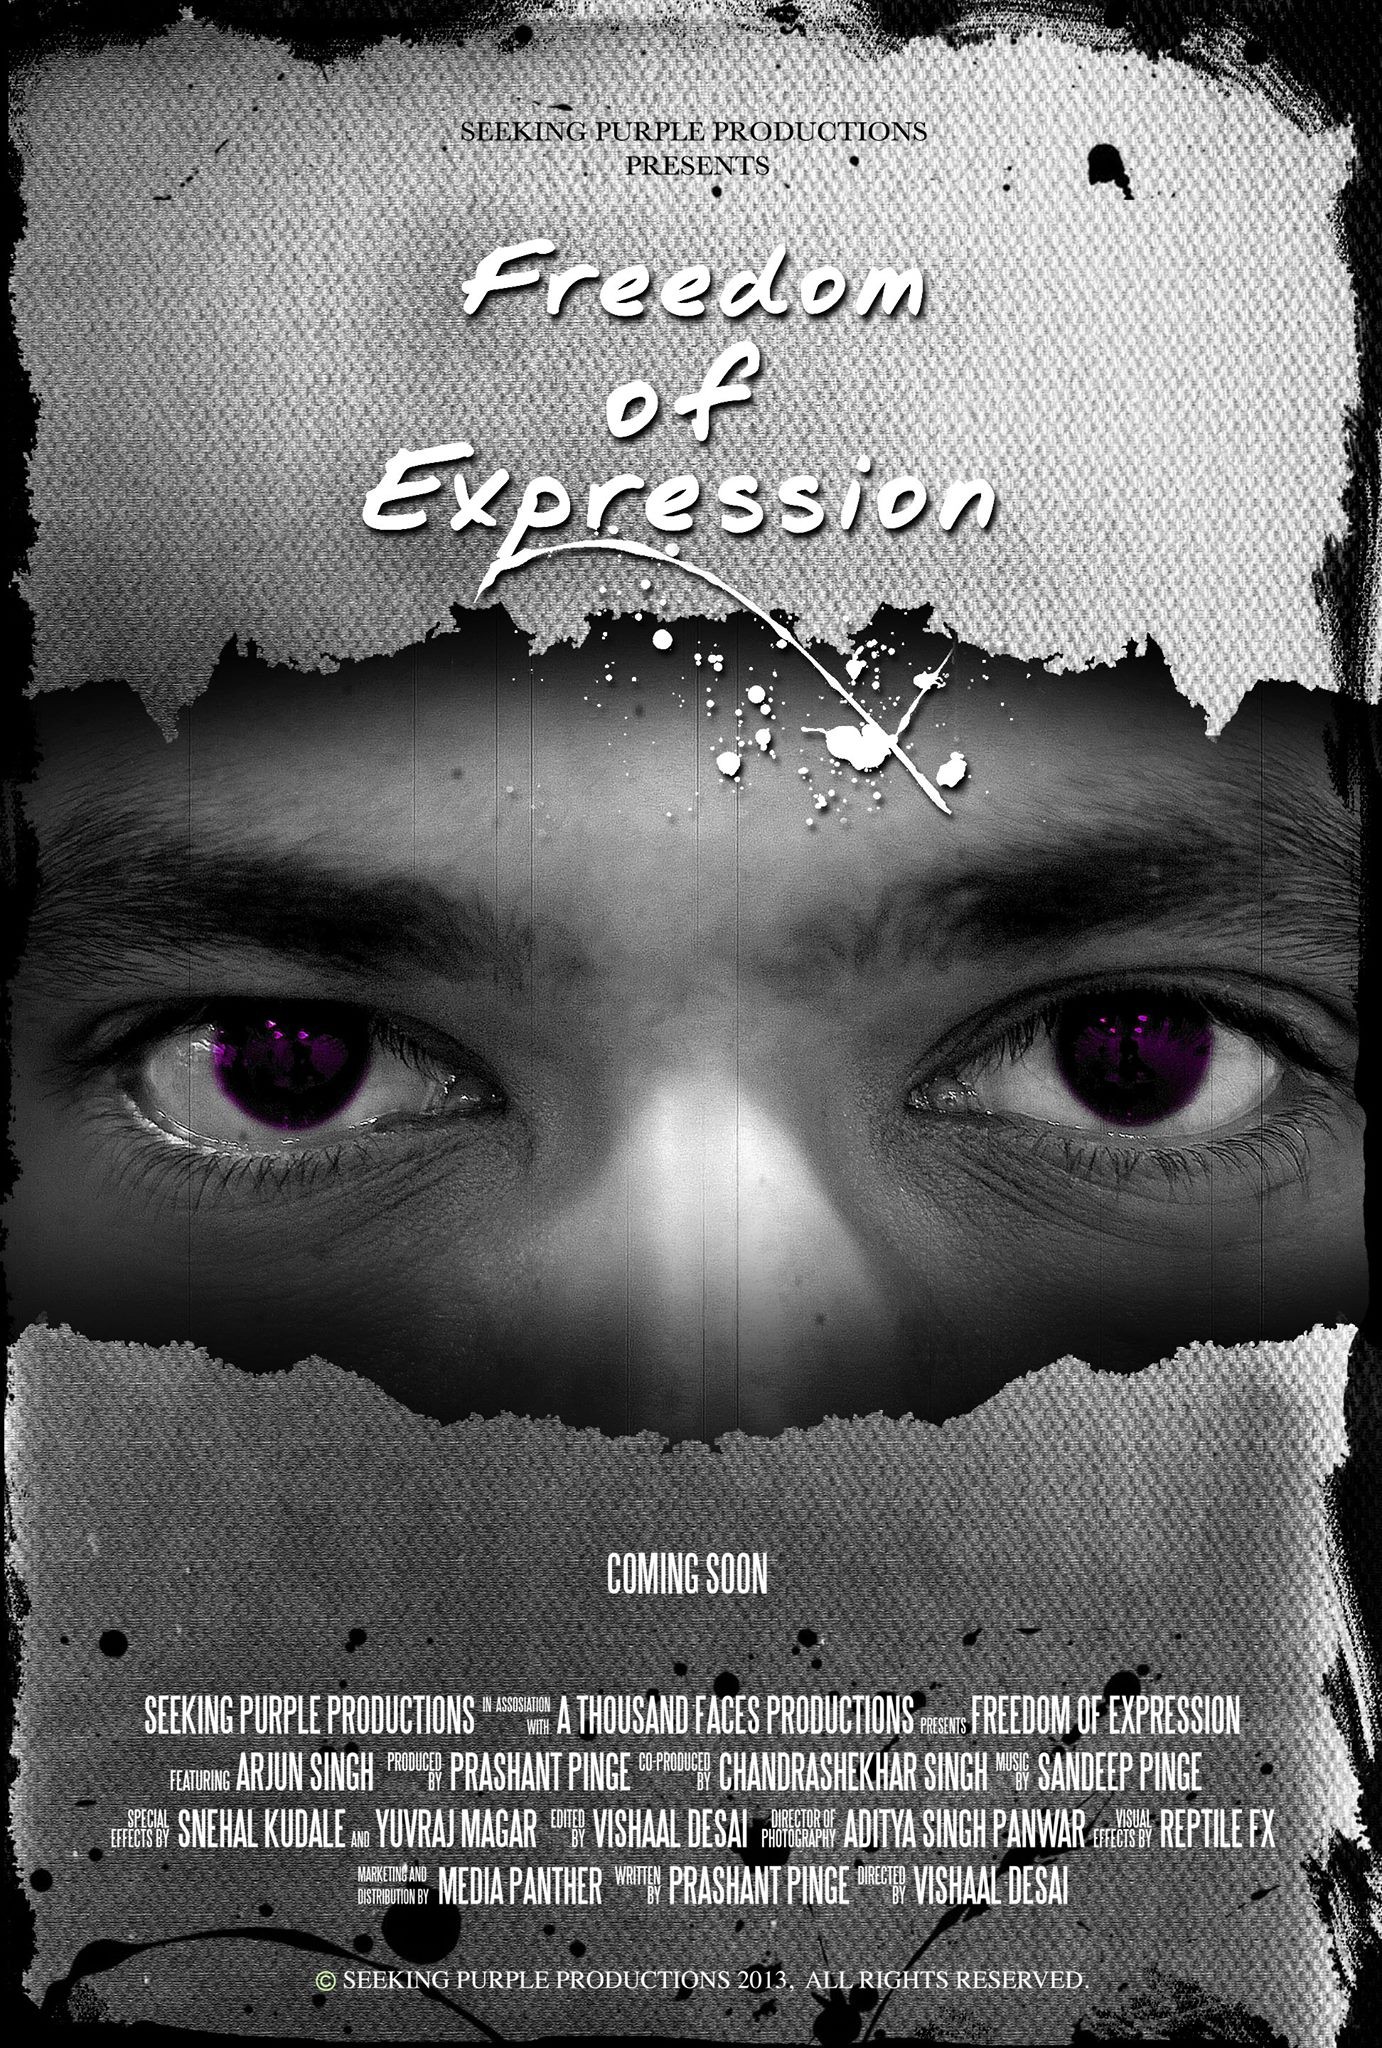 Mega Sized Movie Poster Image for Freedom of Expression